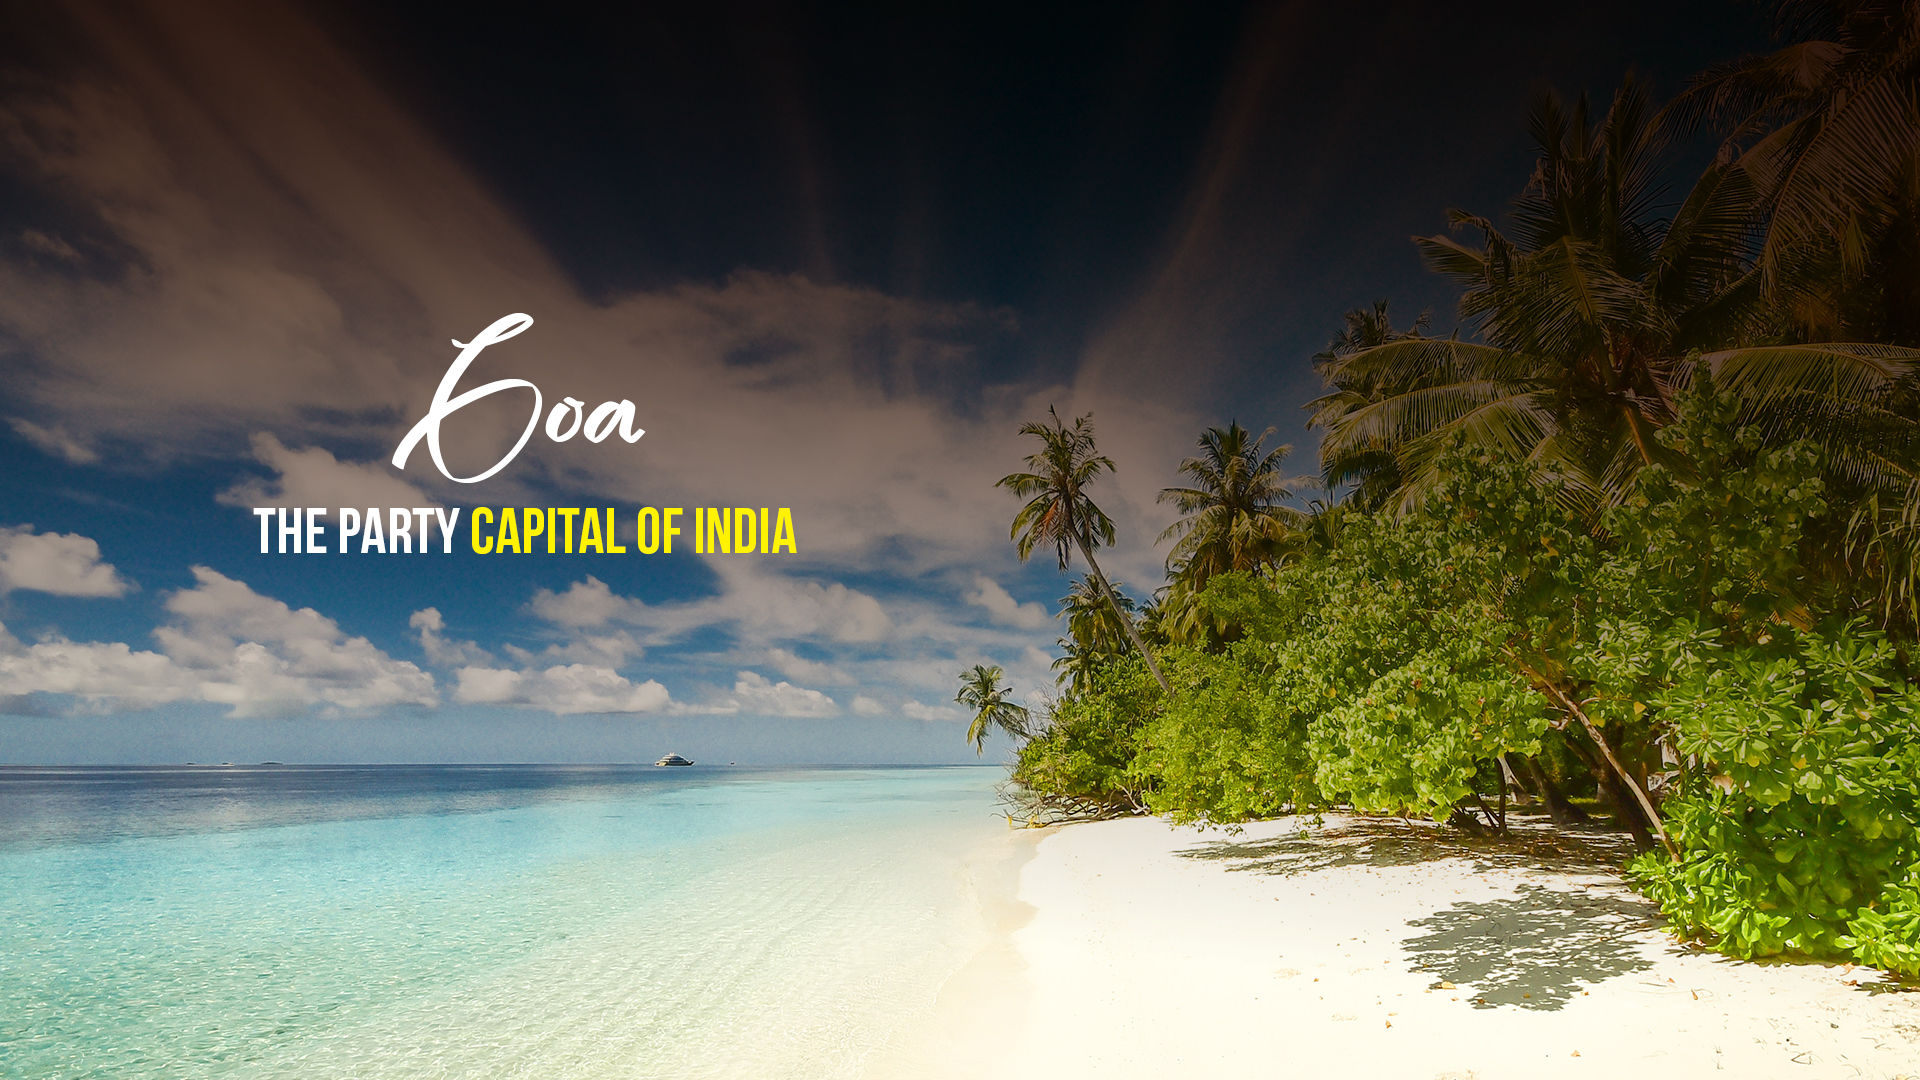 Goa Tour packages : Book Goa Tours and Holiday Packages | Tripoto